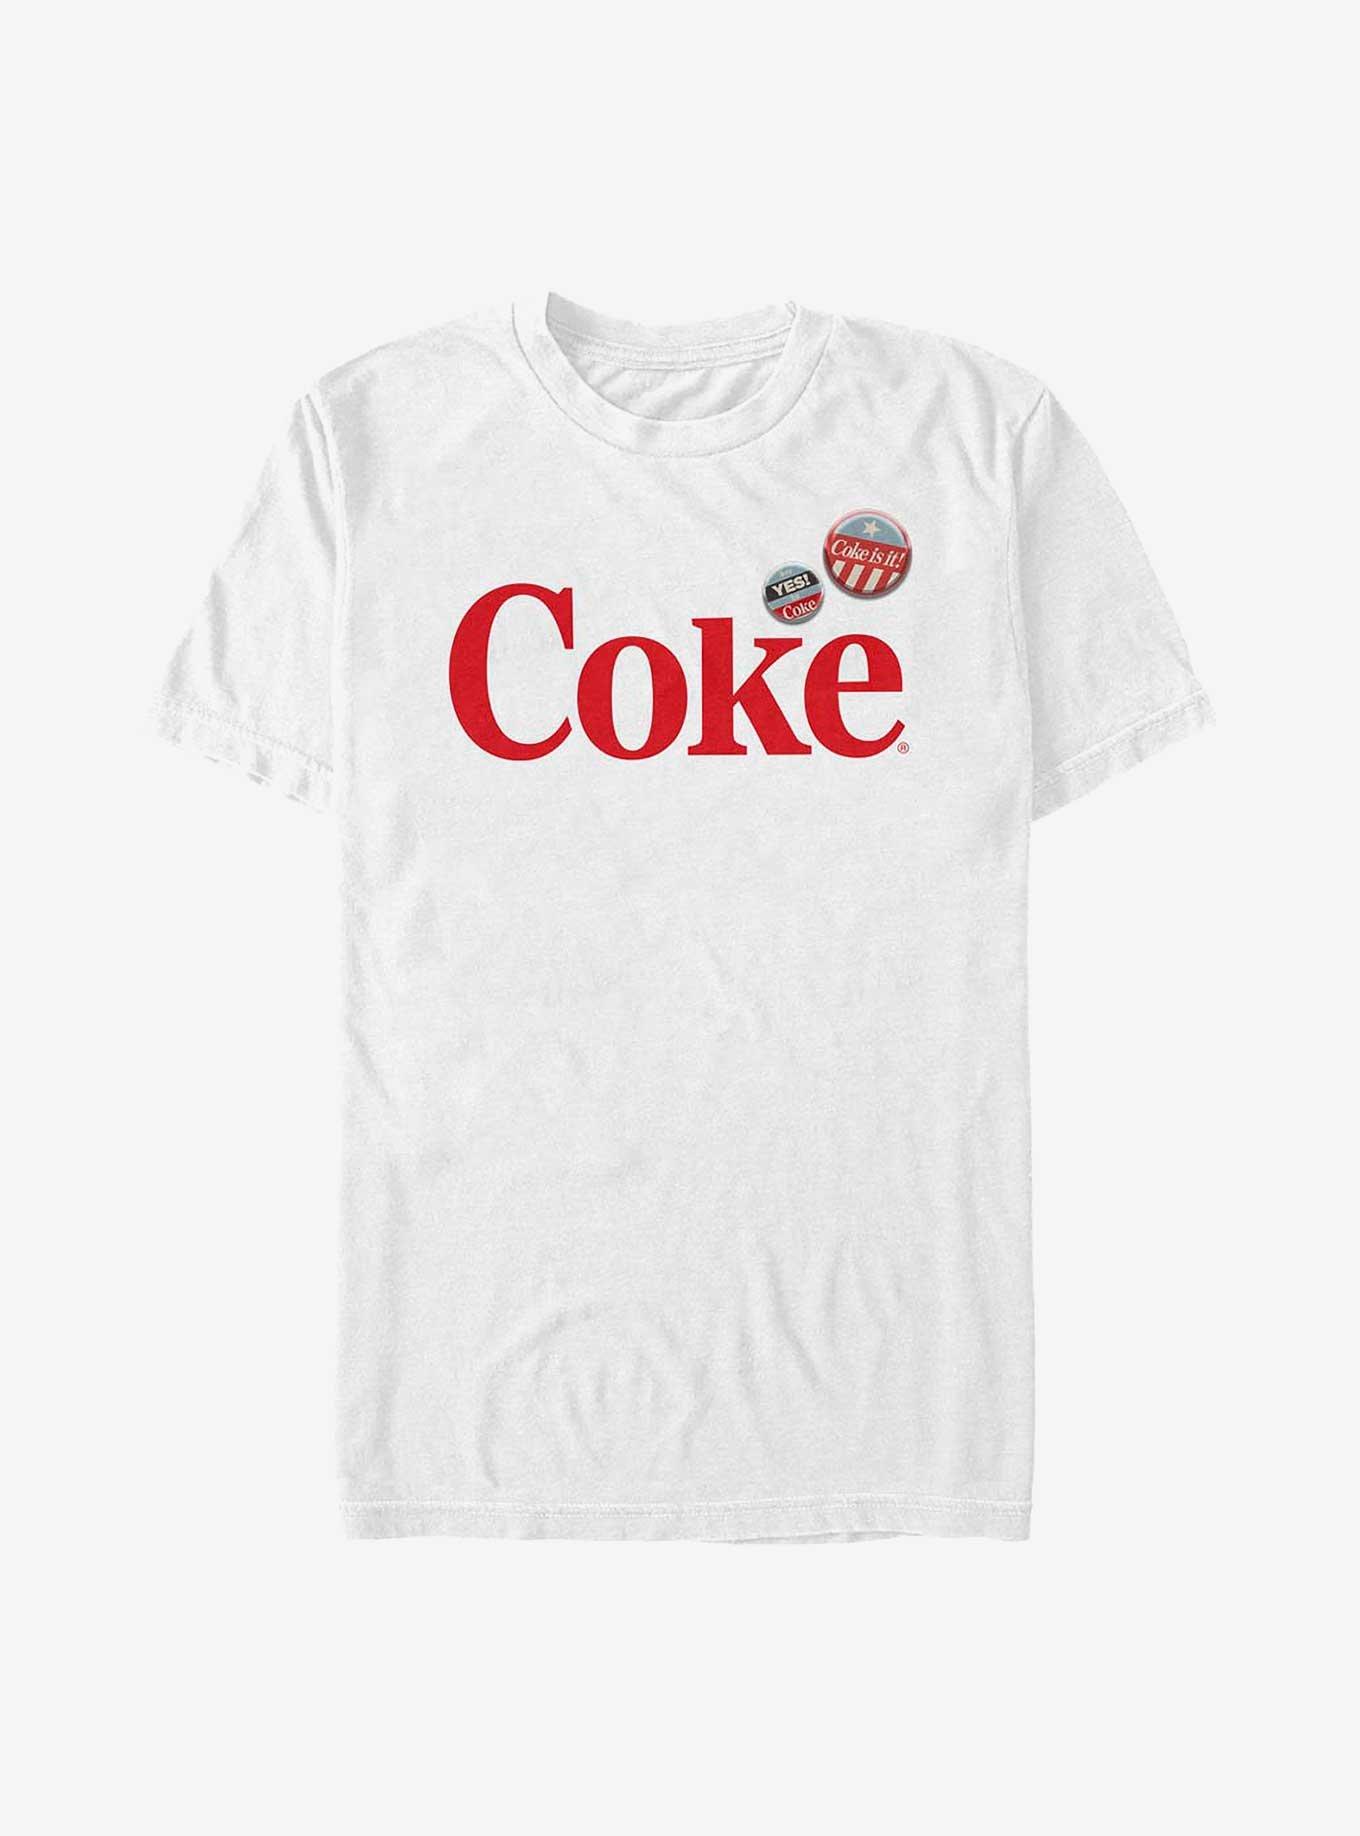 Coca-Cola Coke With Buttons T-Shirt, WHITE, hi-res